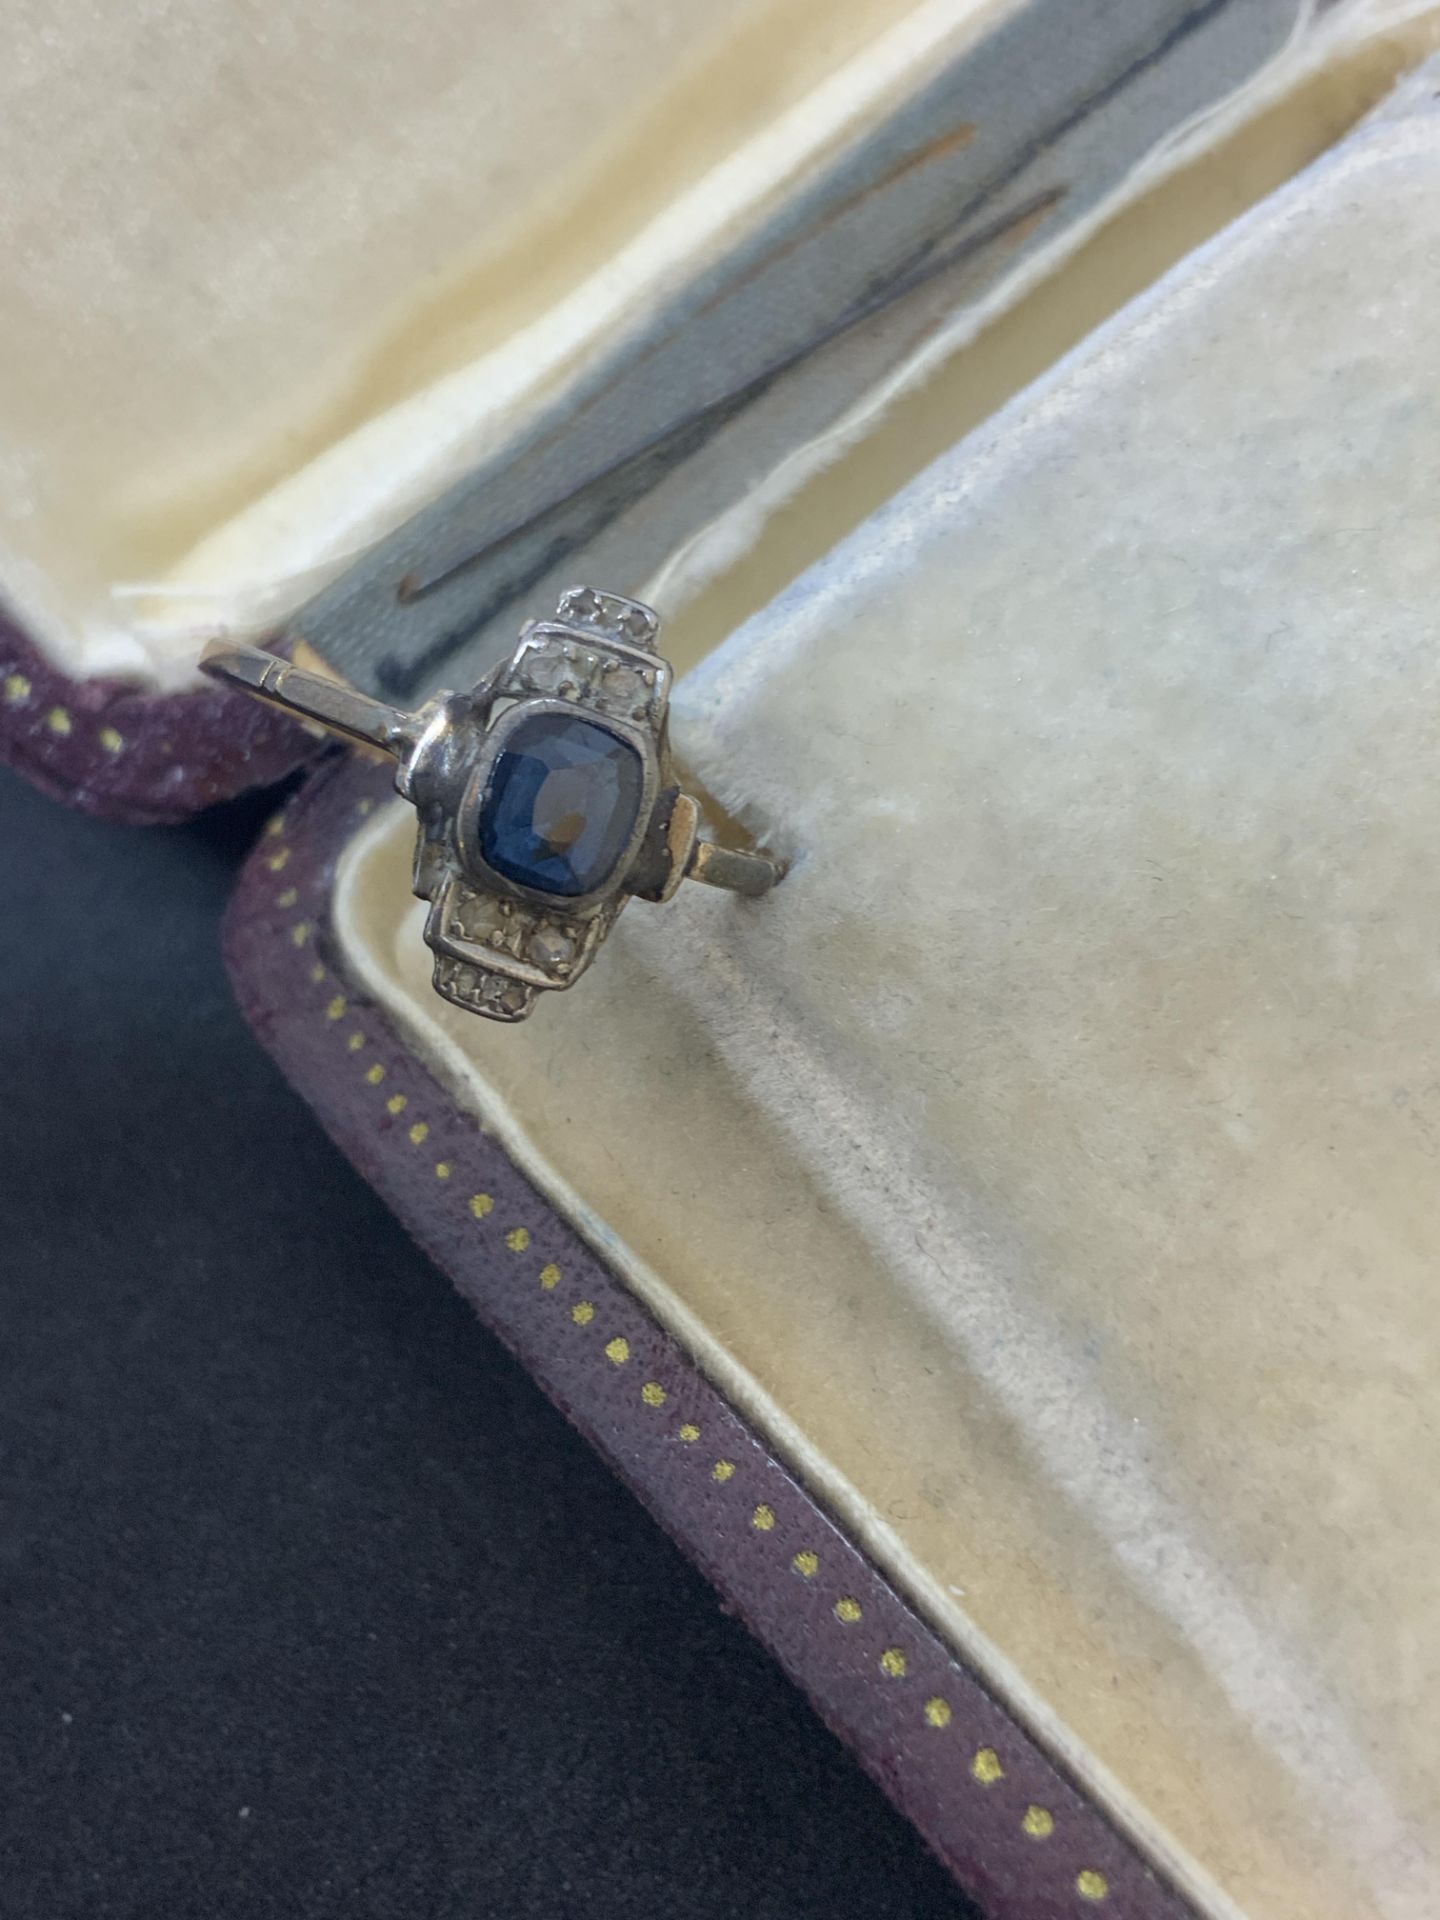 ANTIQUE SAPPHIRE & DIAMOND RING SET IN GOLD - Image 6 of 7